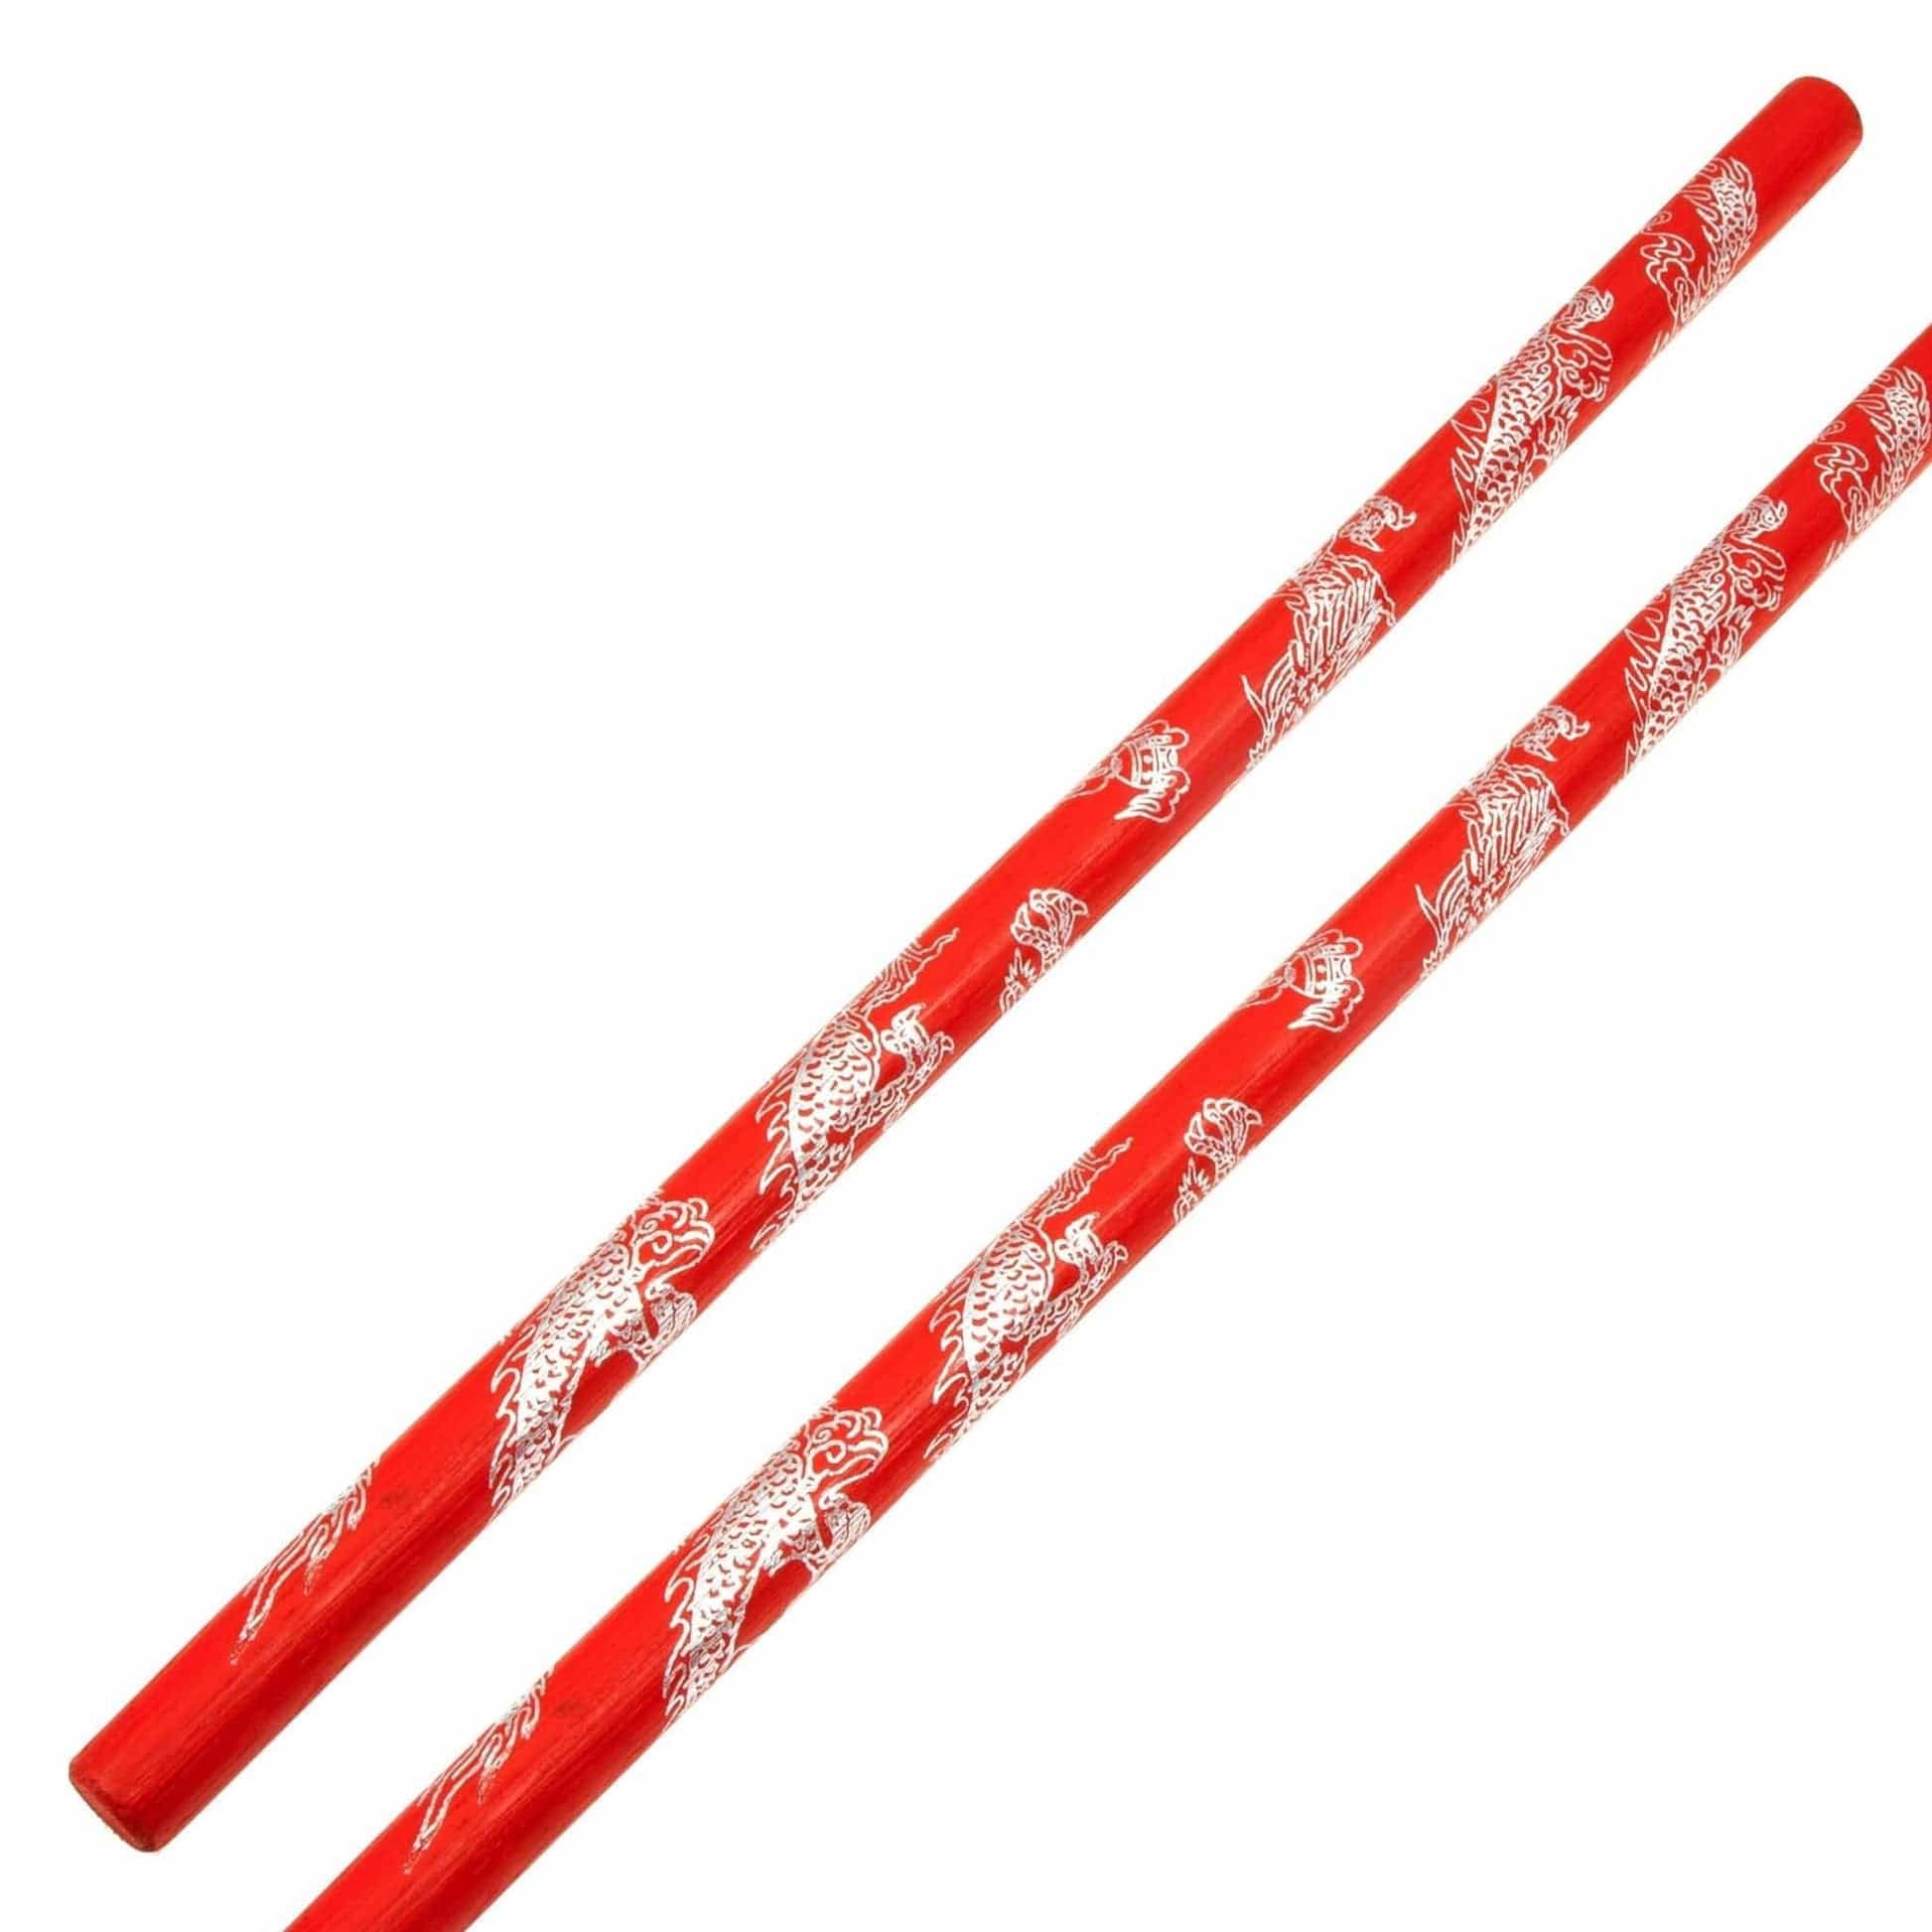 ProForce sporting goods 20 inch Red Escrima Sticks with Dragon Kali Pair